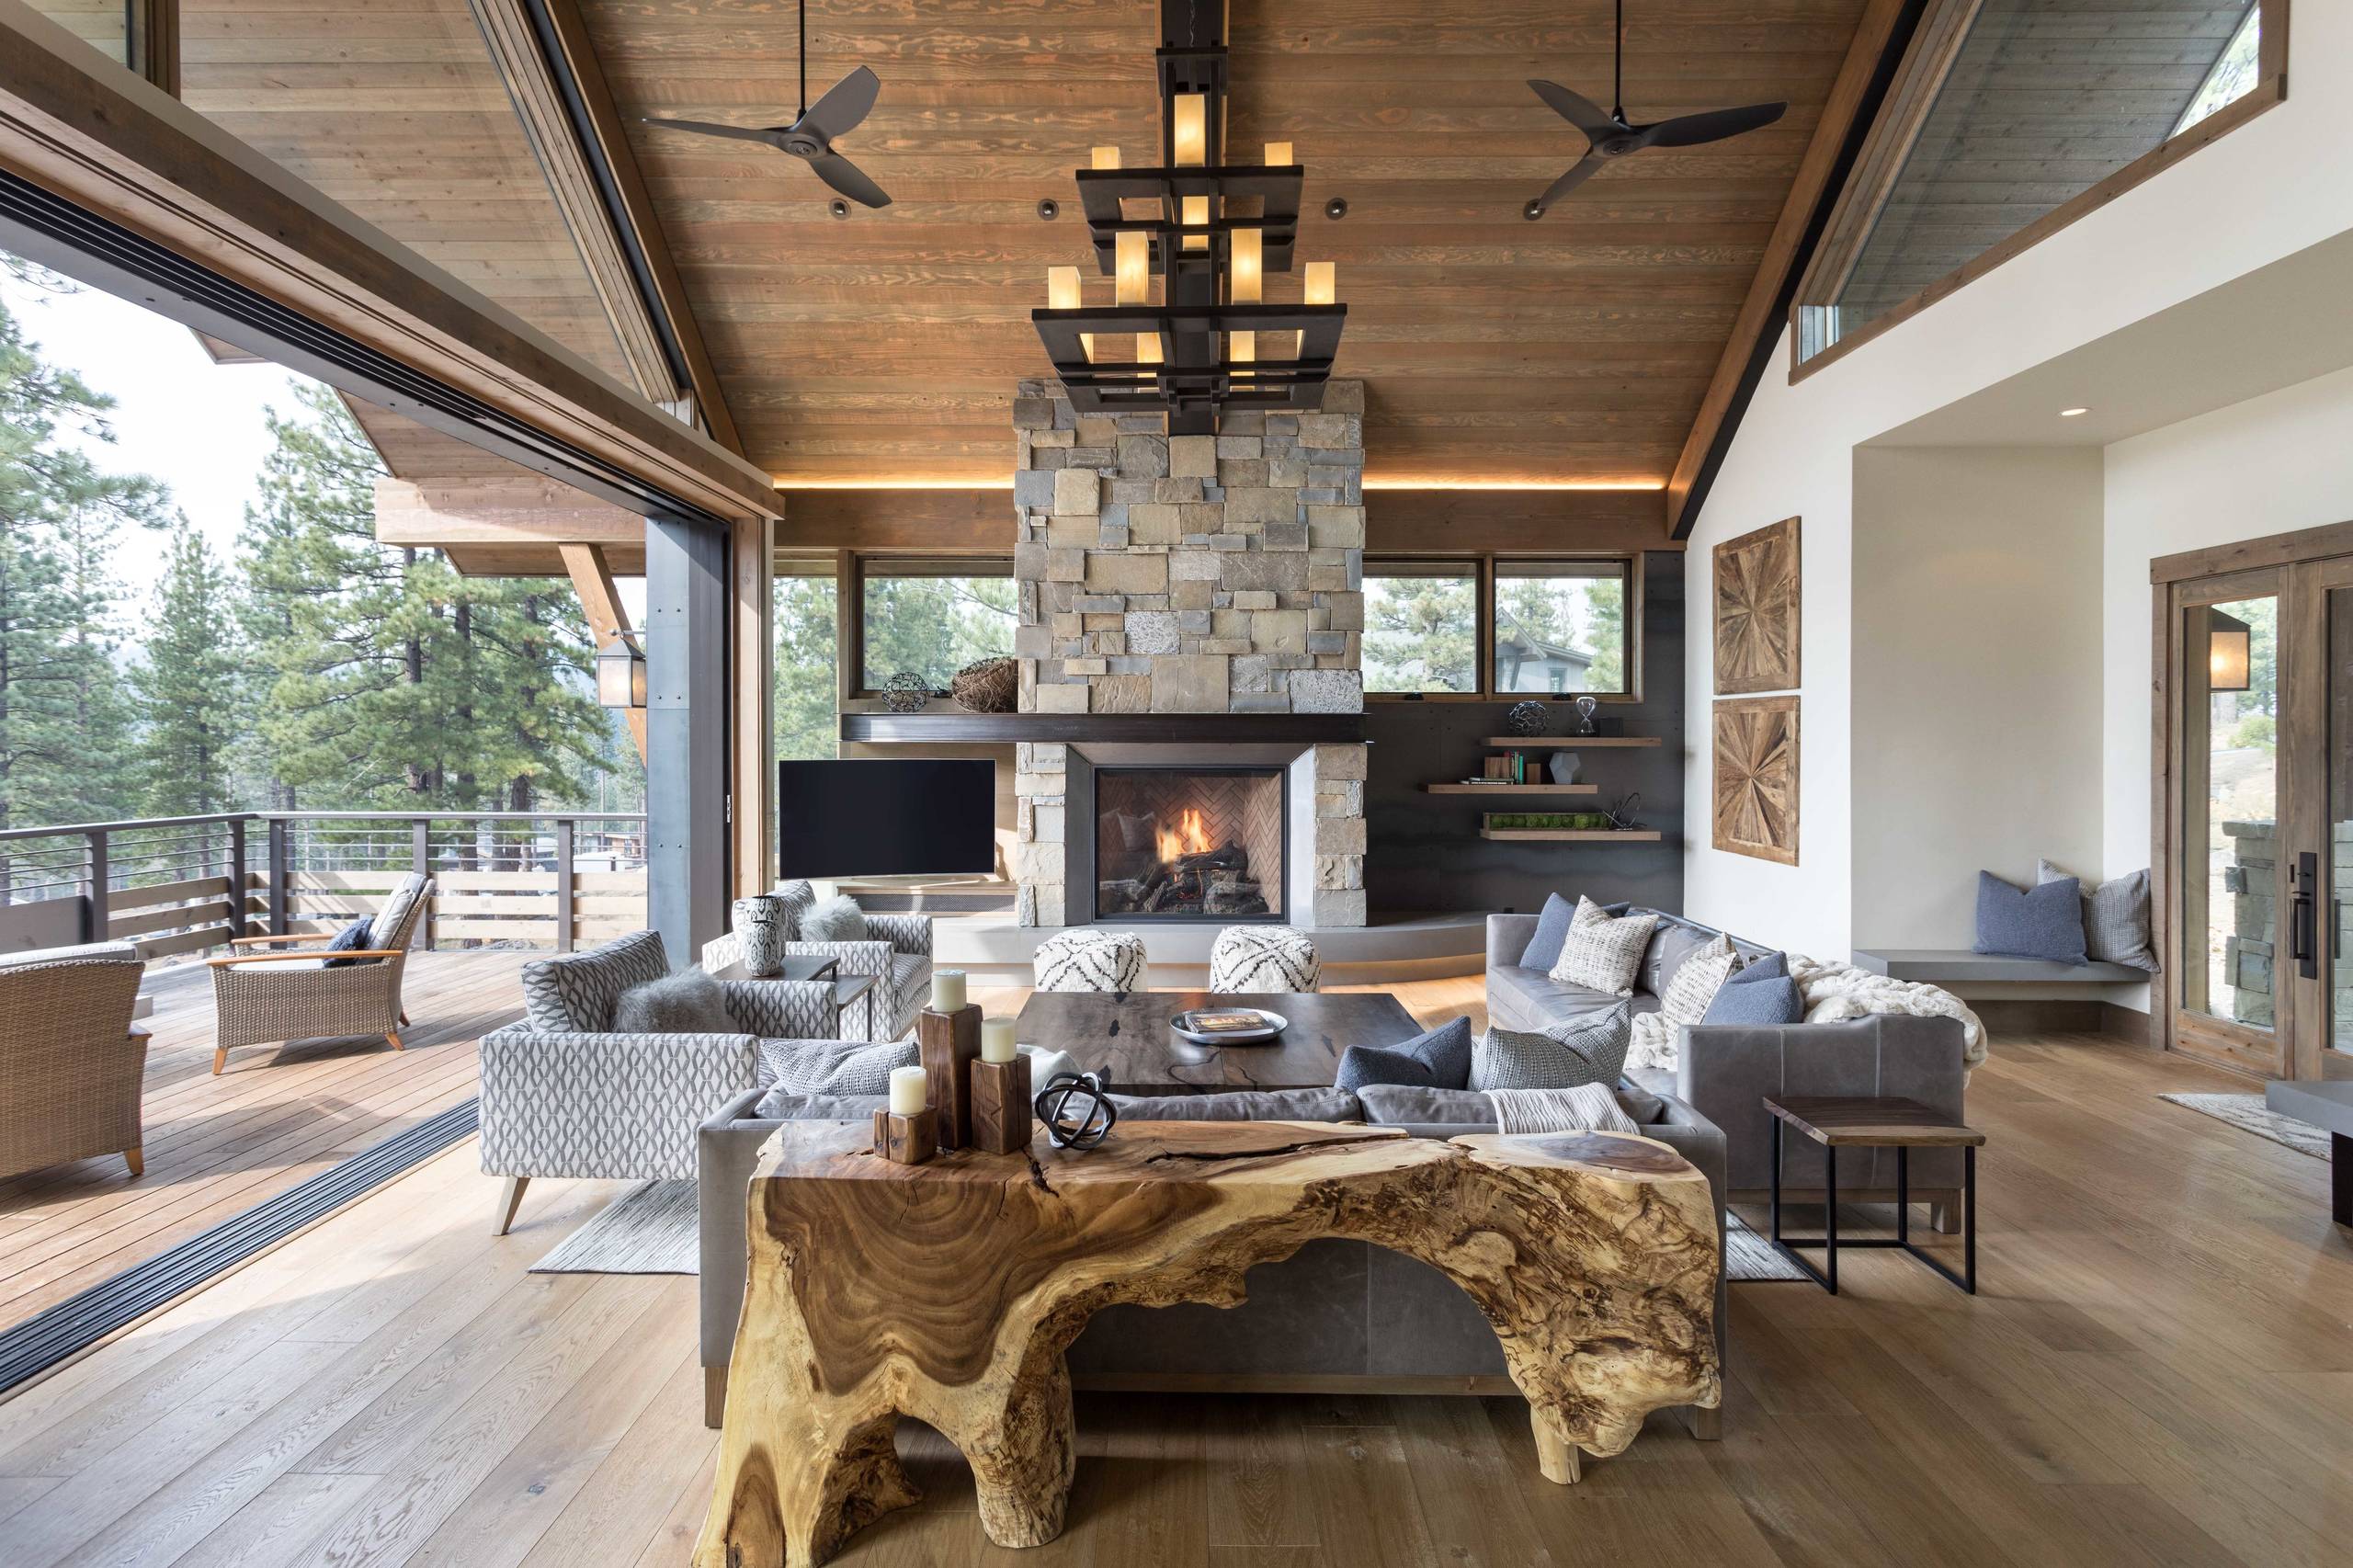 https://st.hzcdn.com/simgs/pictures/living-rooms/modern-lodge-interior-design-by-julie-johnson-holland-img~3be1ac6c0ad1123f_14-1156-1-f263785.jpg